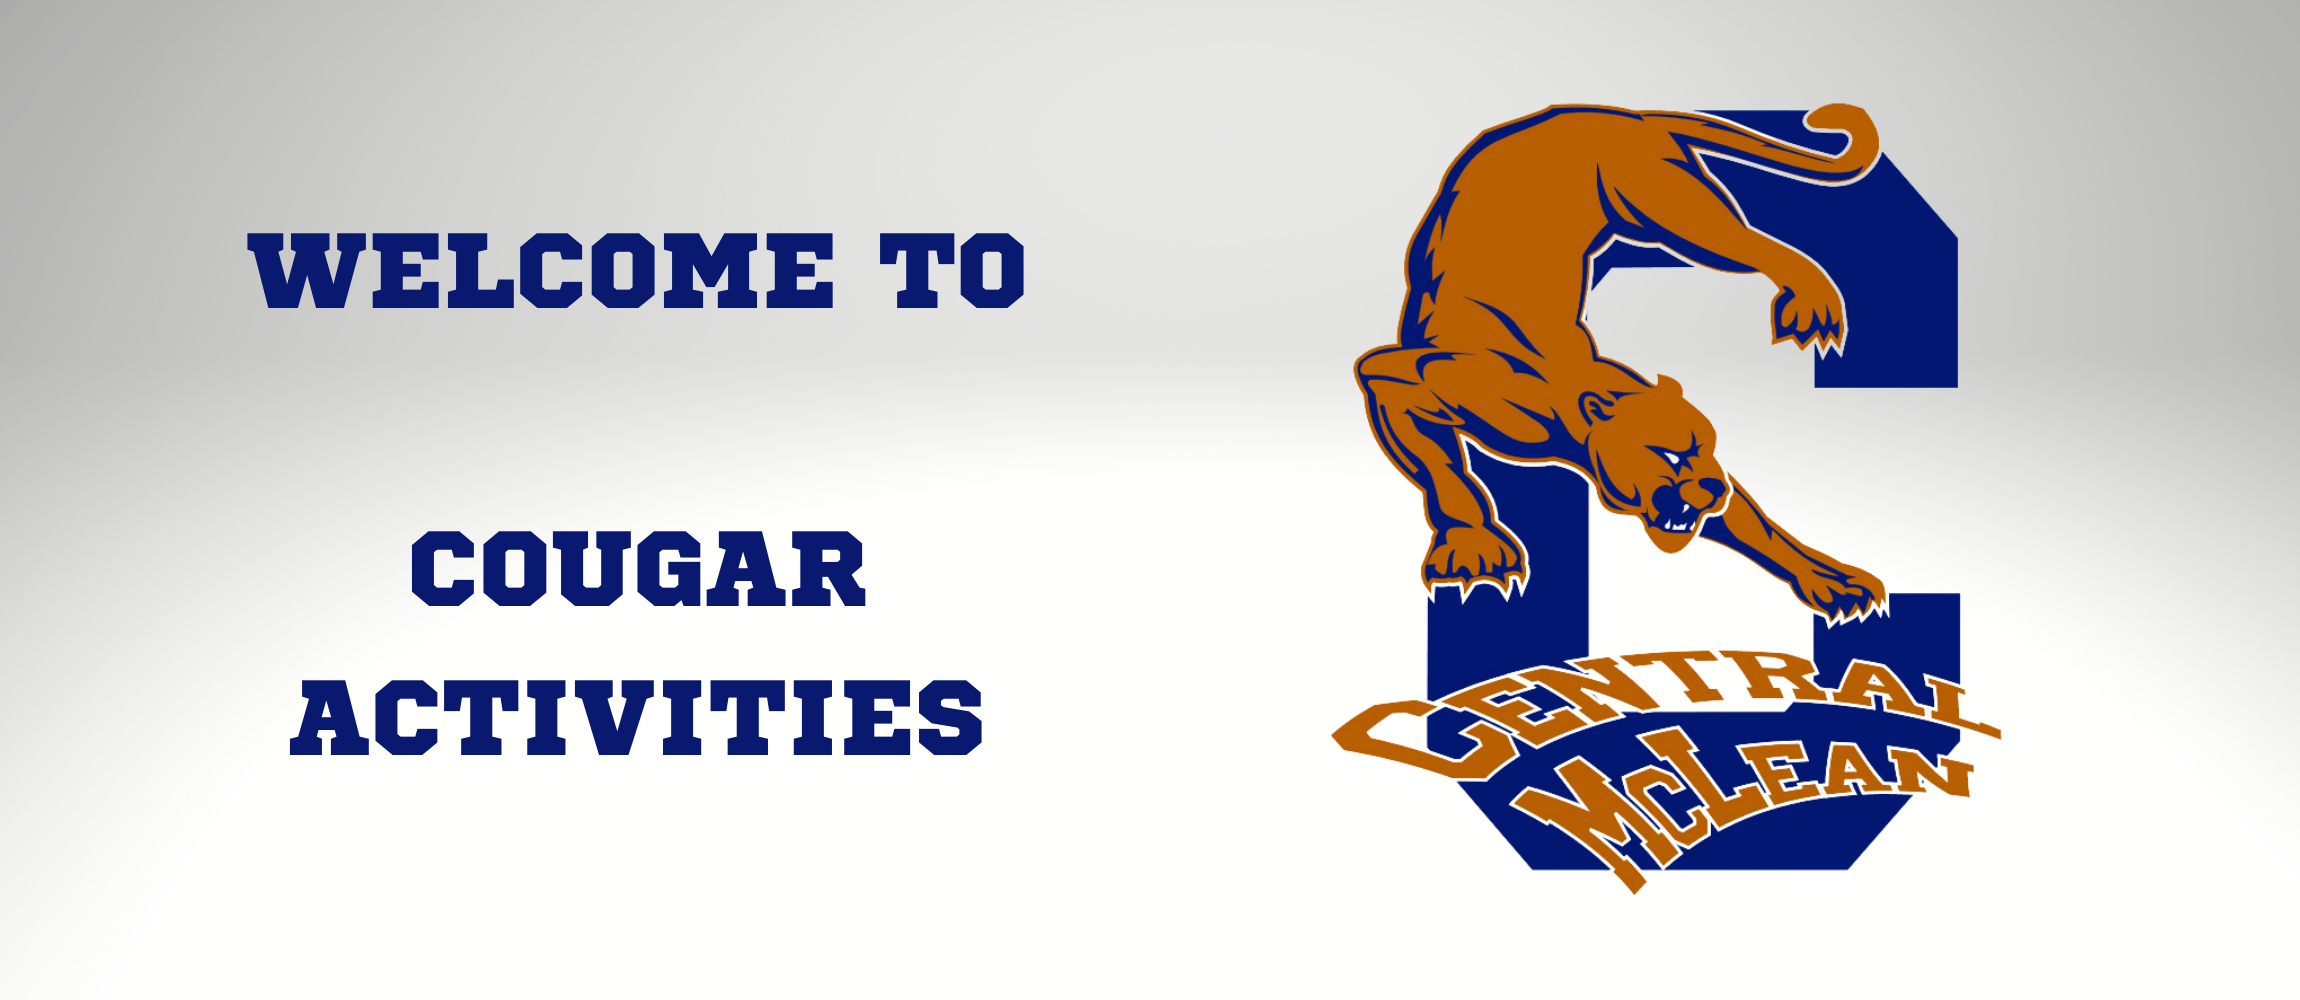 welcome to cougar activities with school logo